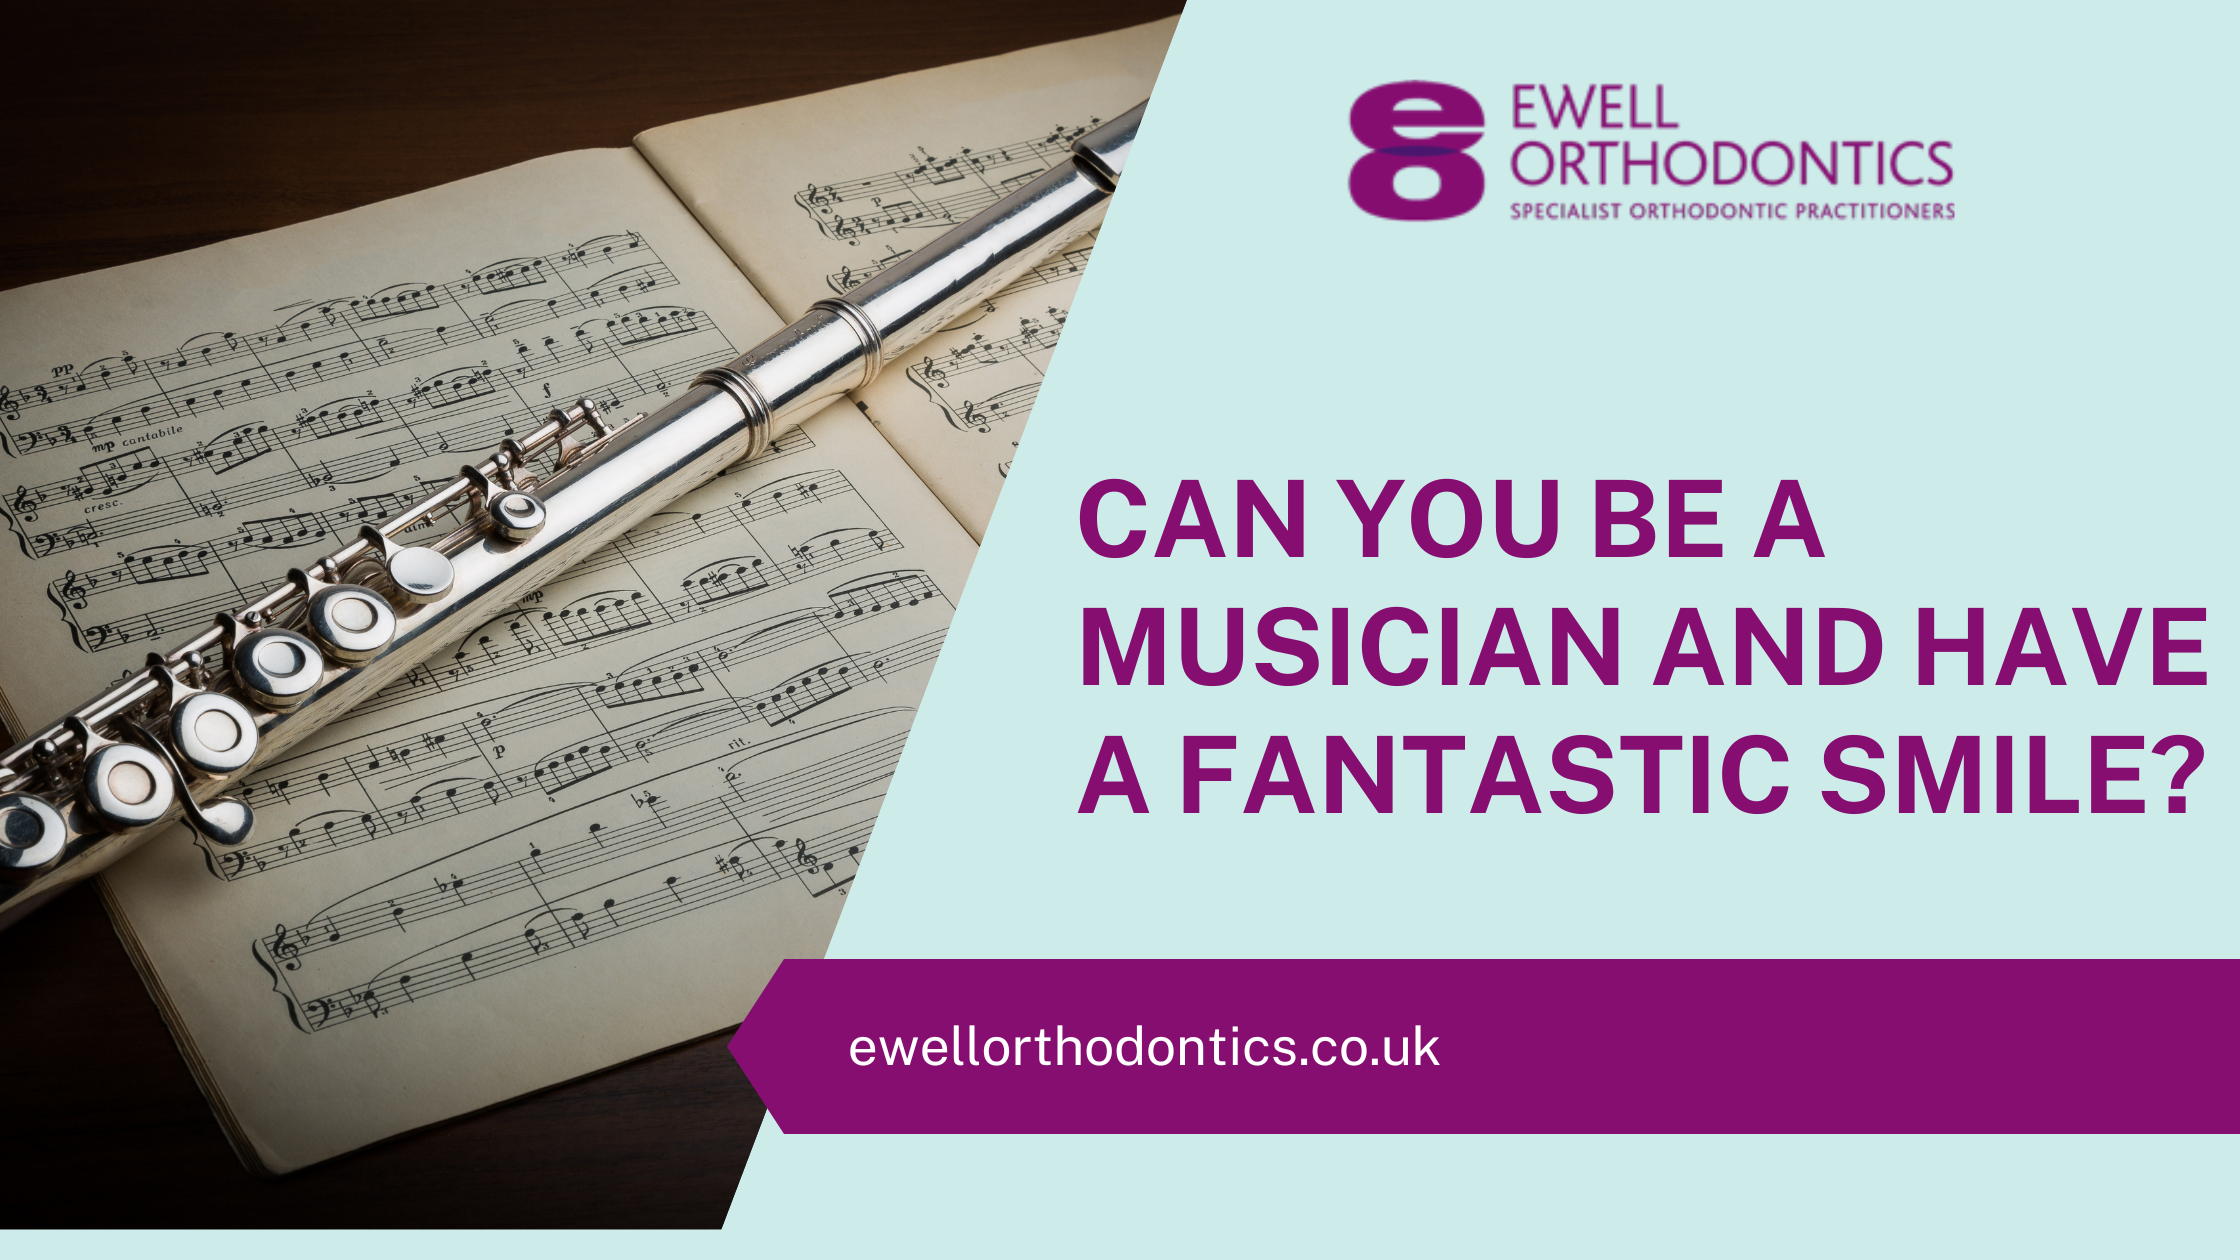 Can you be a musician and have a fantastic smile?